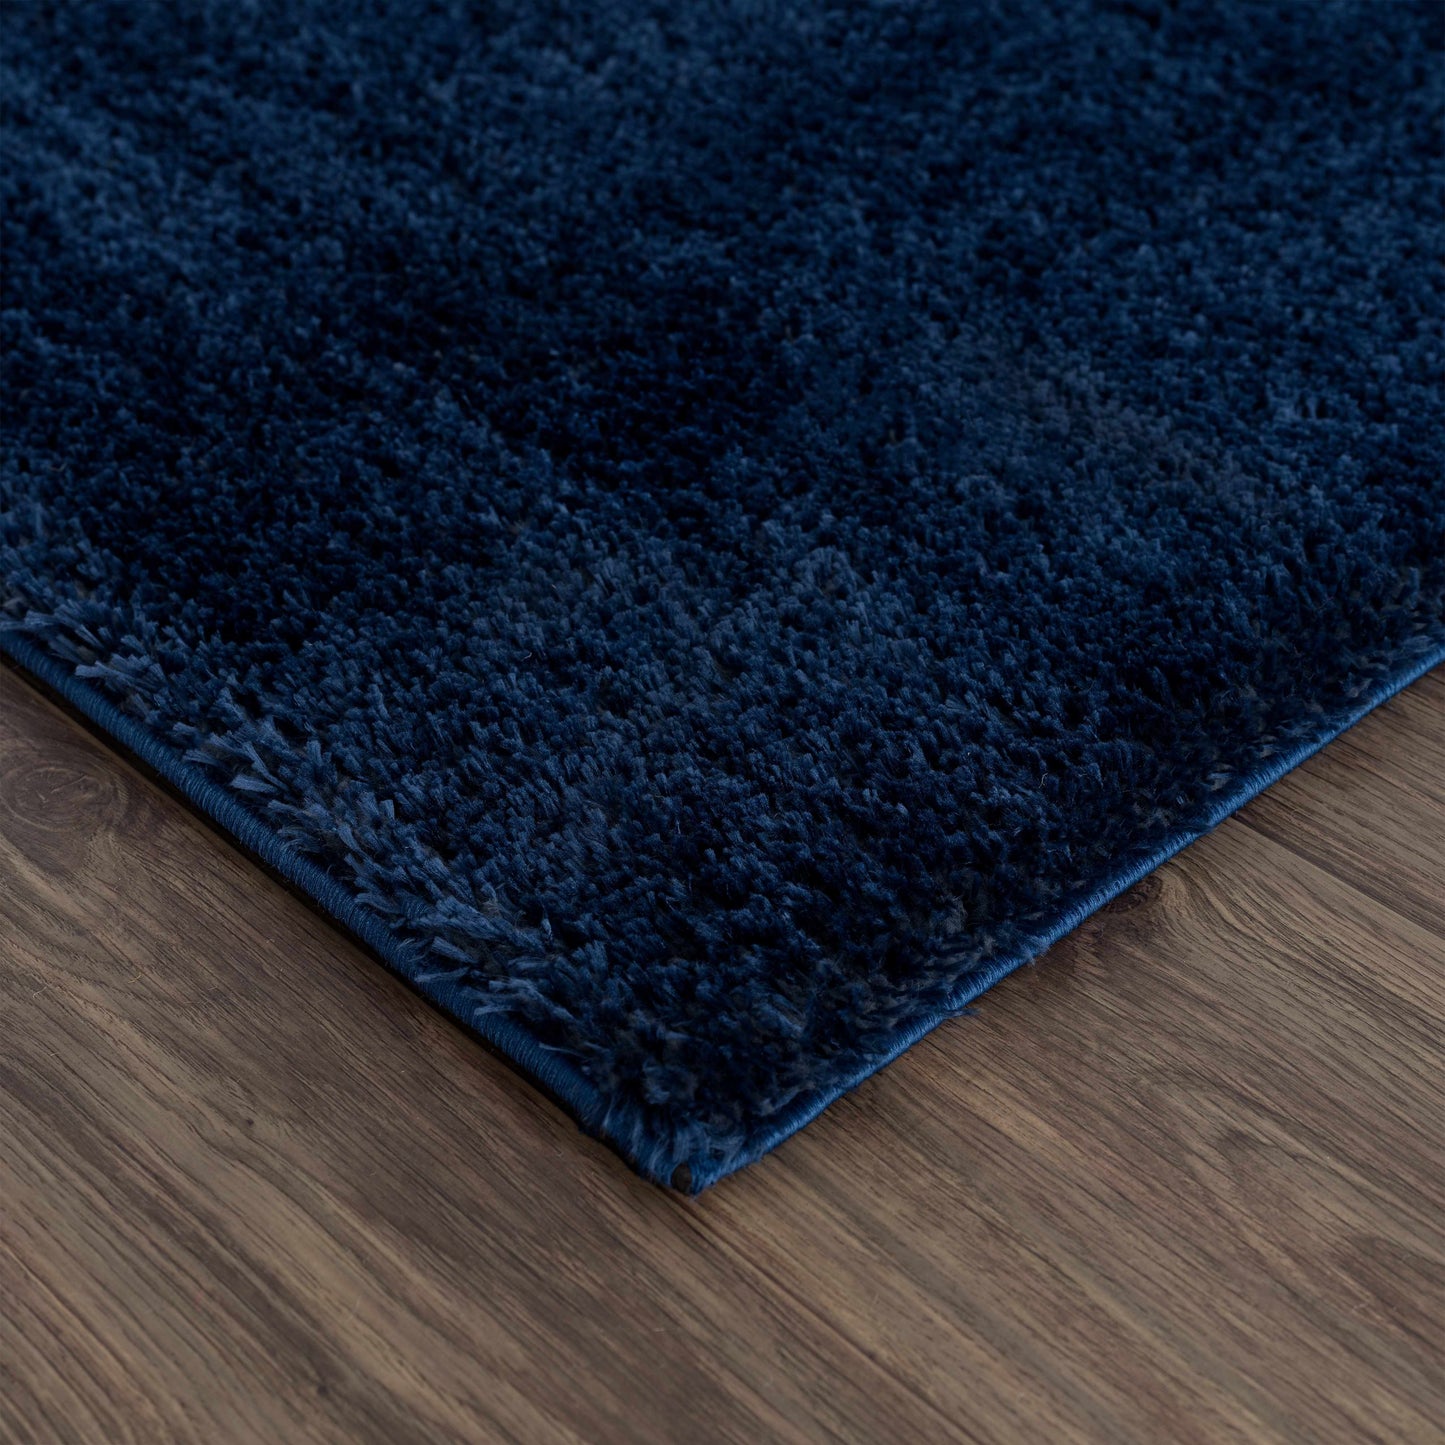 Heavenly Solid Navy Plush Rug.